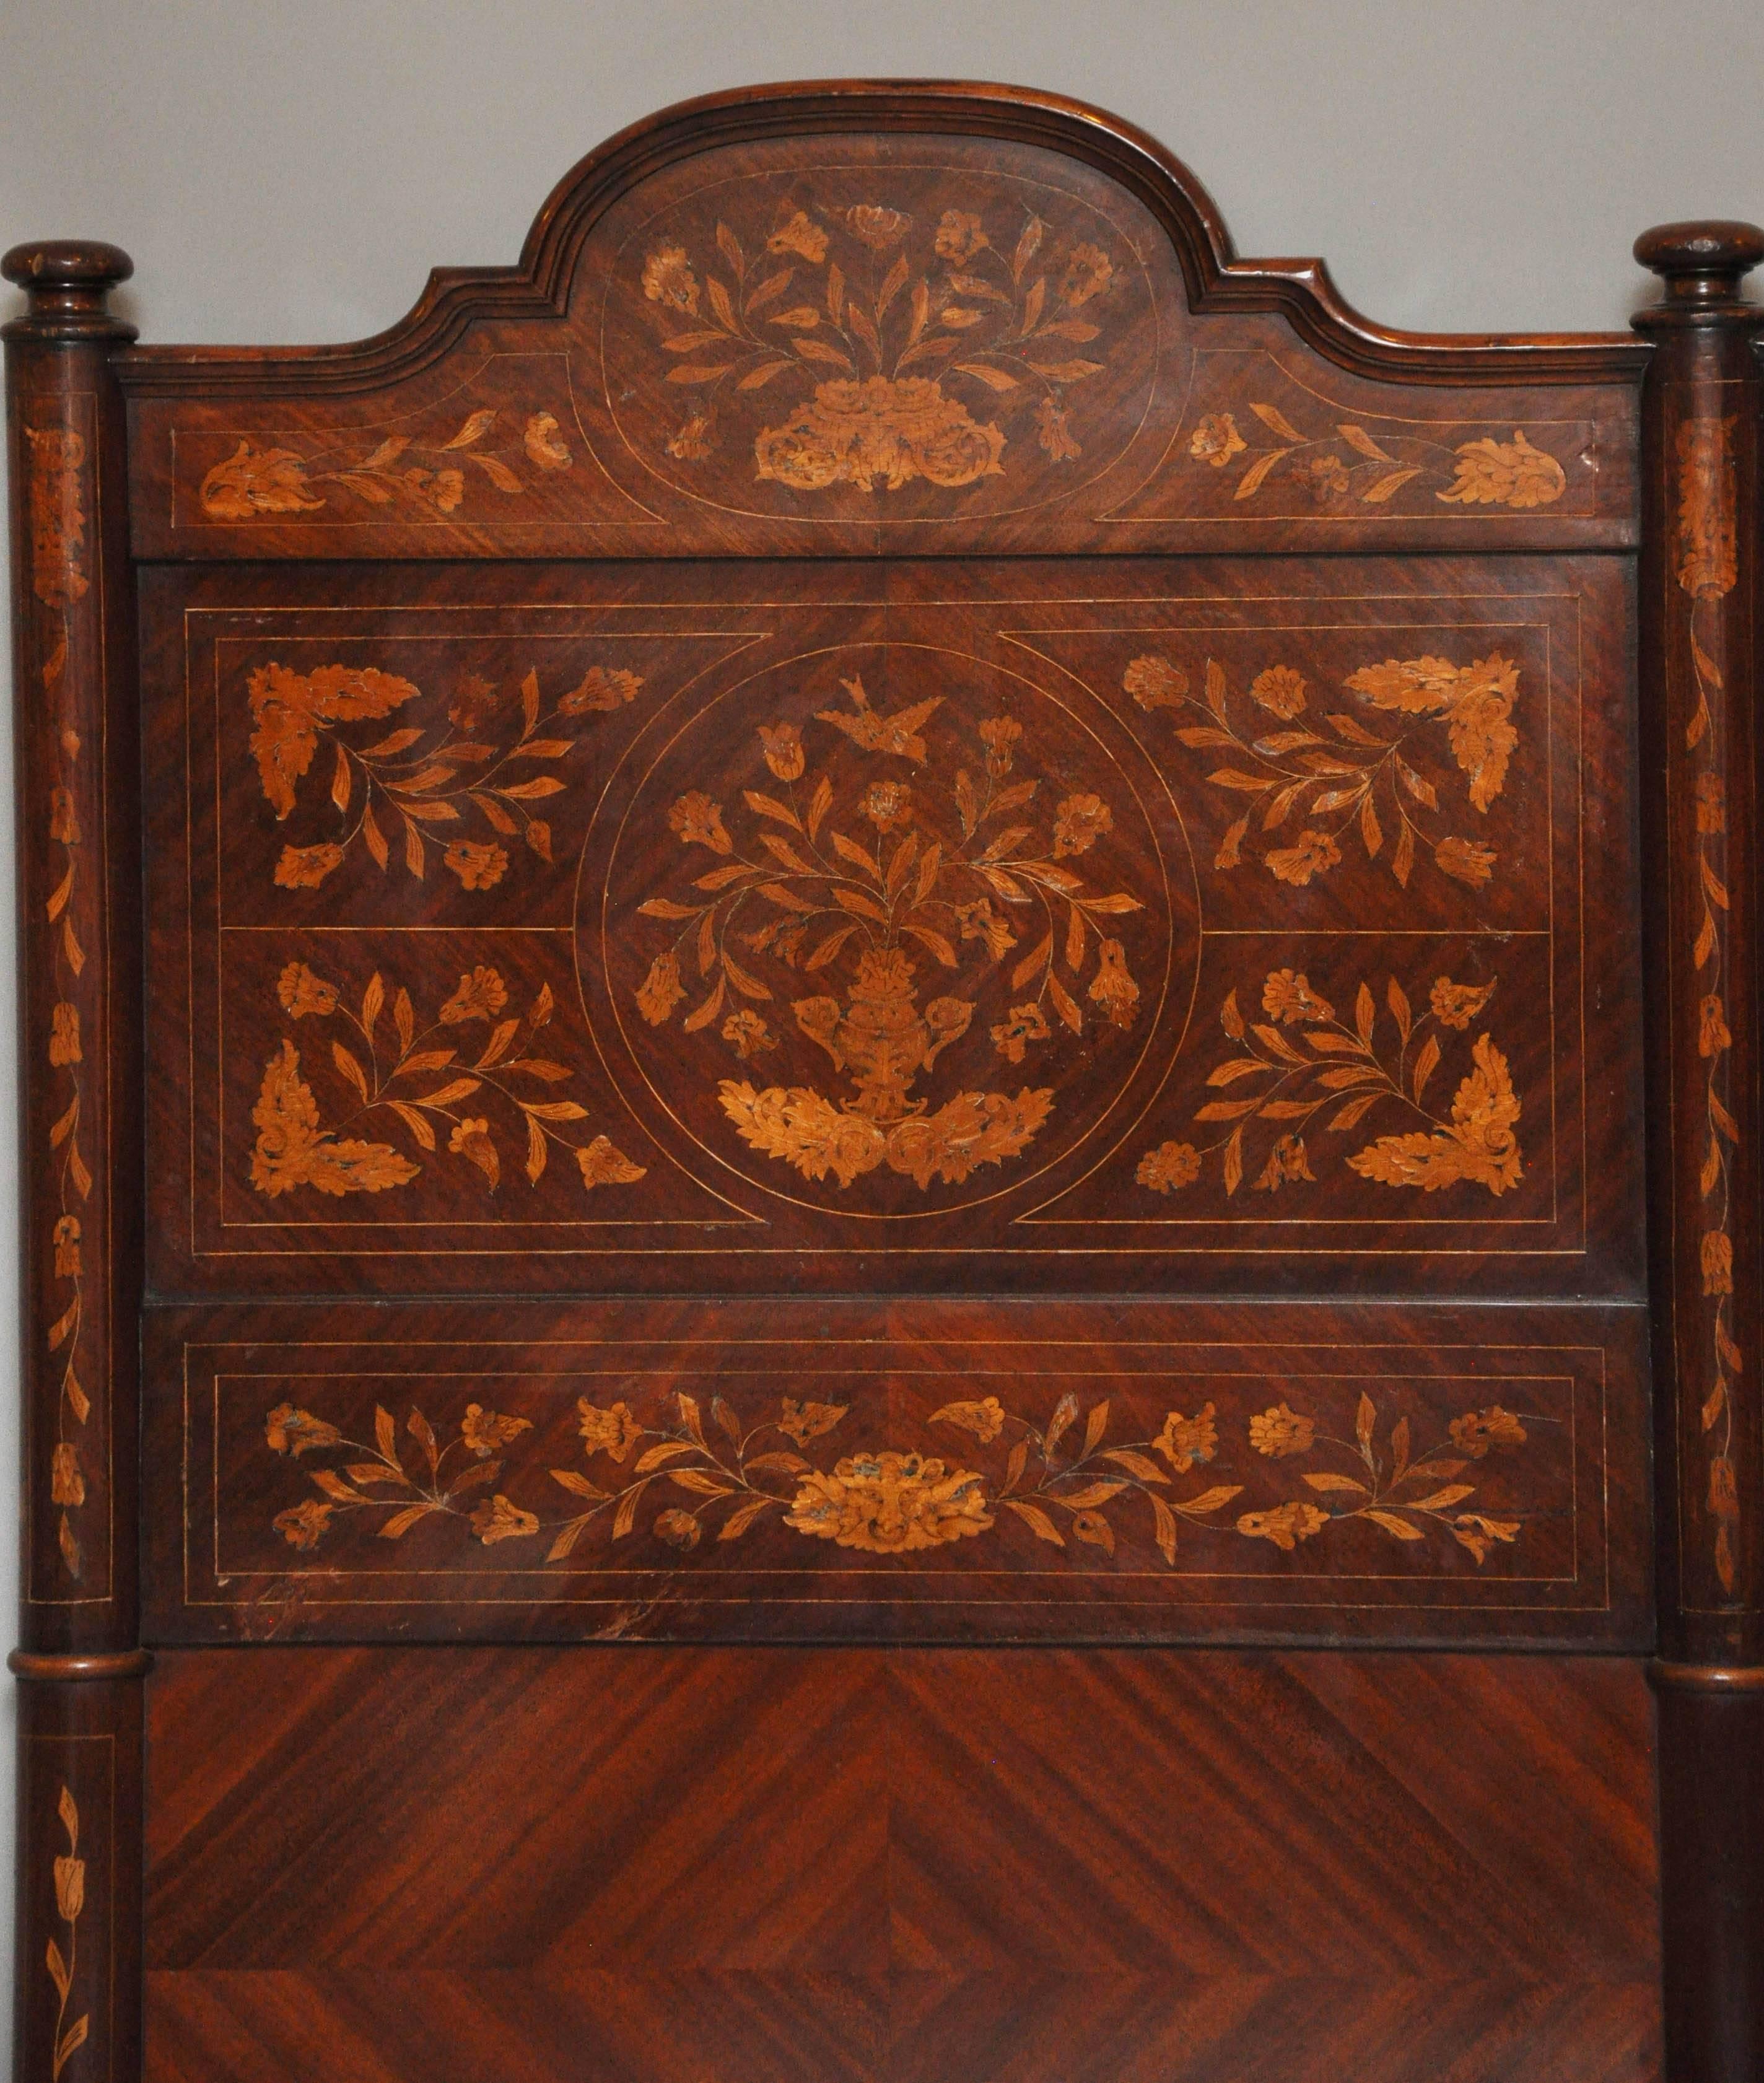 Dutch marquetry king-size bed, converted from a pair of single 18th century single beds. Headboard with diamond shaped parquetry pattern panels beneath geometric, floral and foliate marquetry surmounted by a shapely crown, footboard with floral